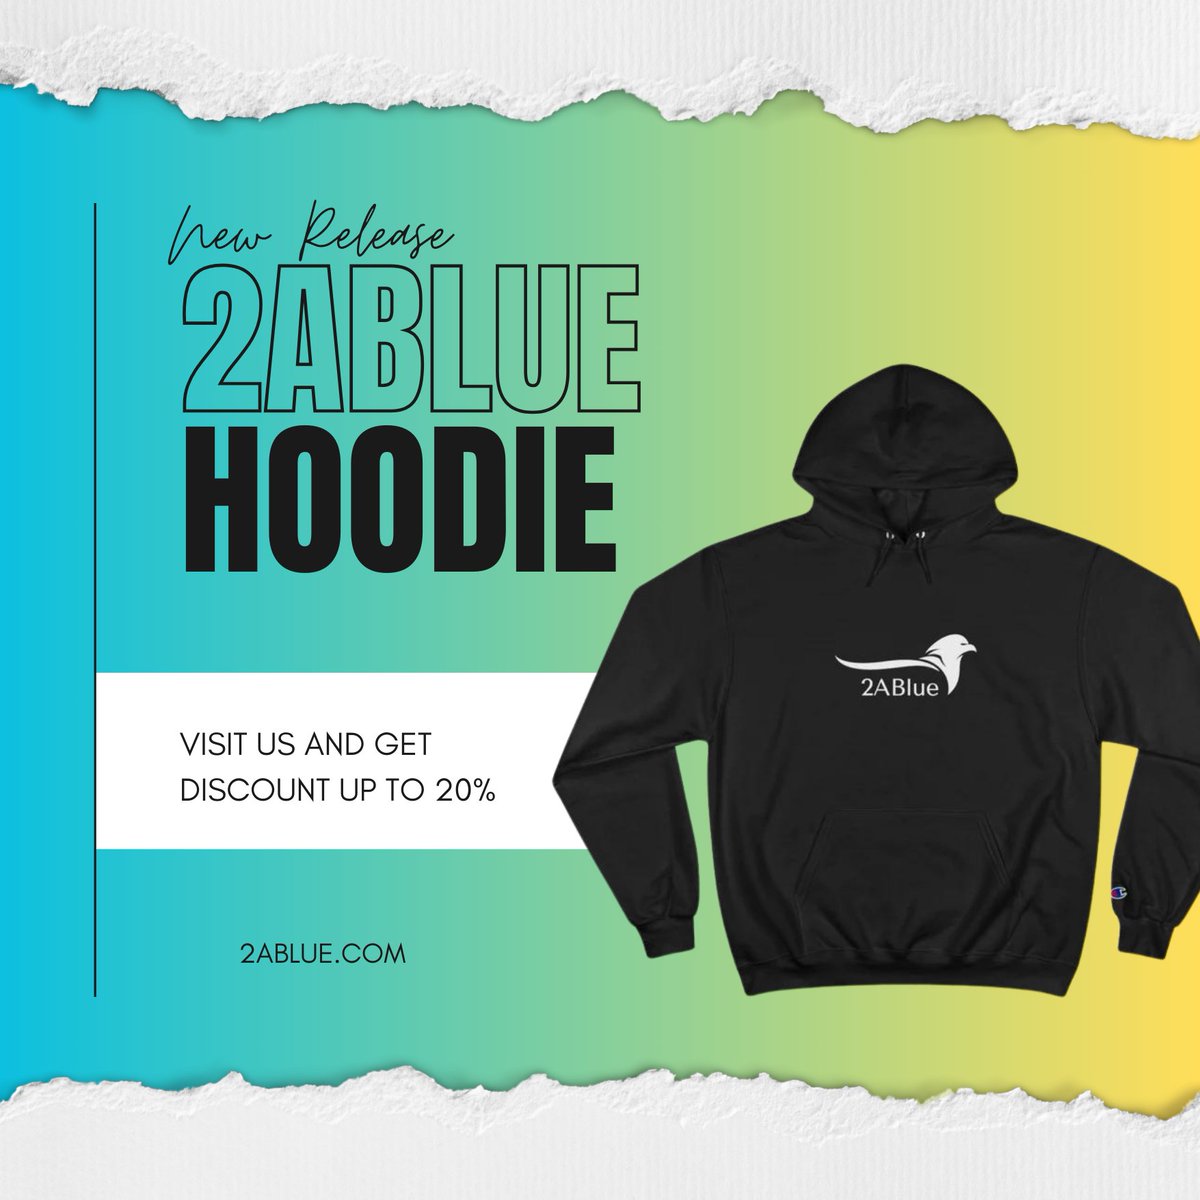 End your weekend by purchasing a new 2ABlue Hoodie! #2ABlue #hoodiestyle #sale #clothesforsale #exciting